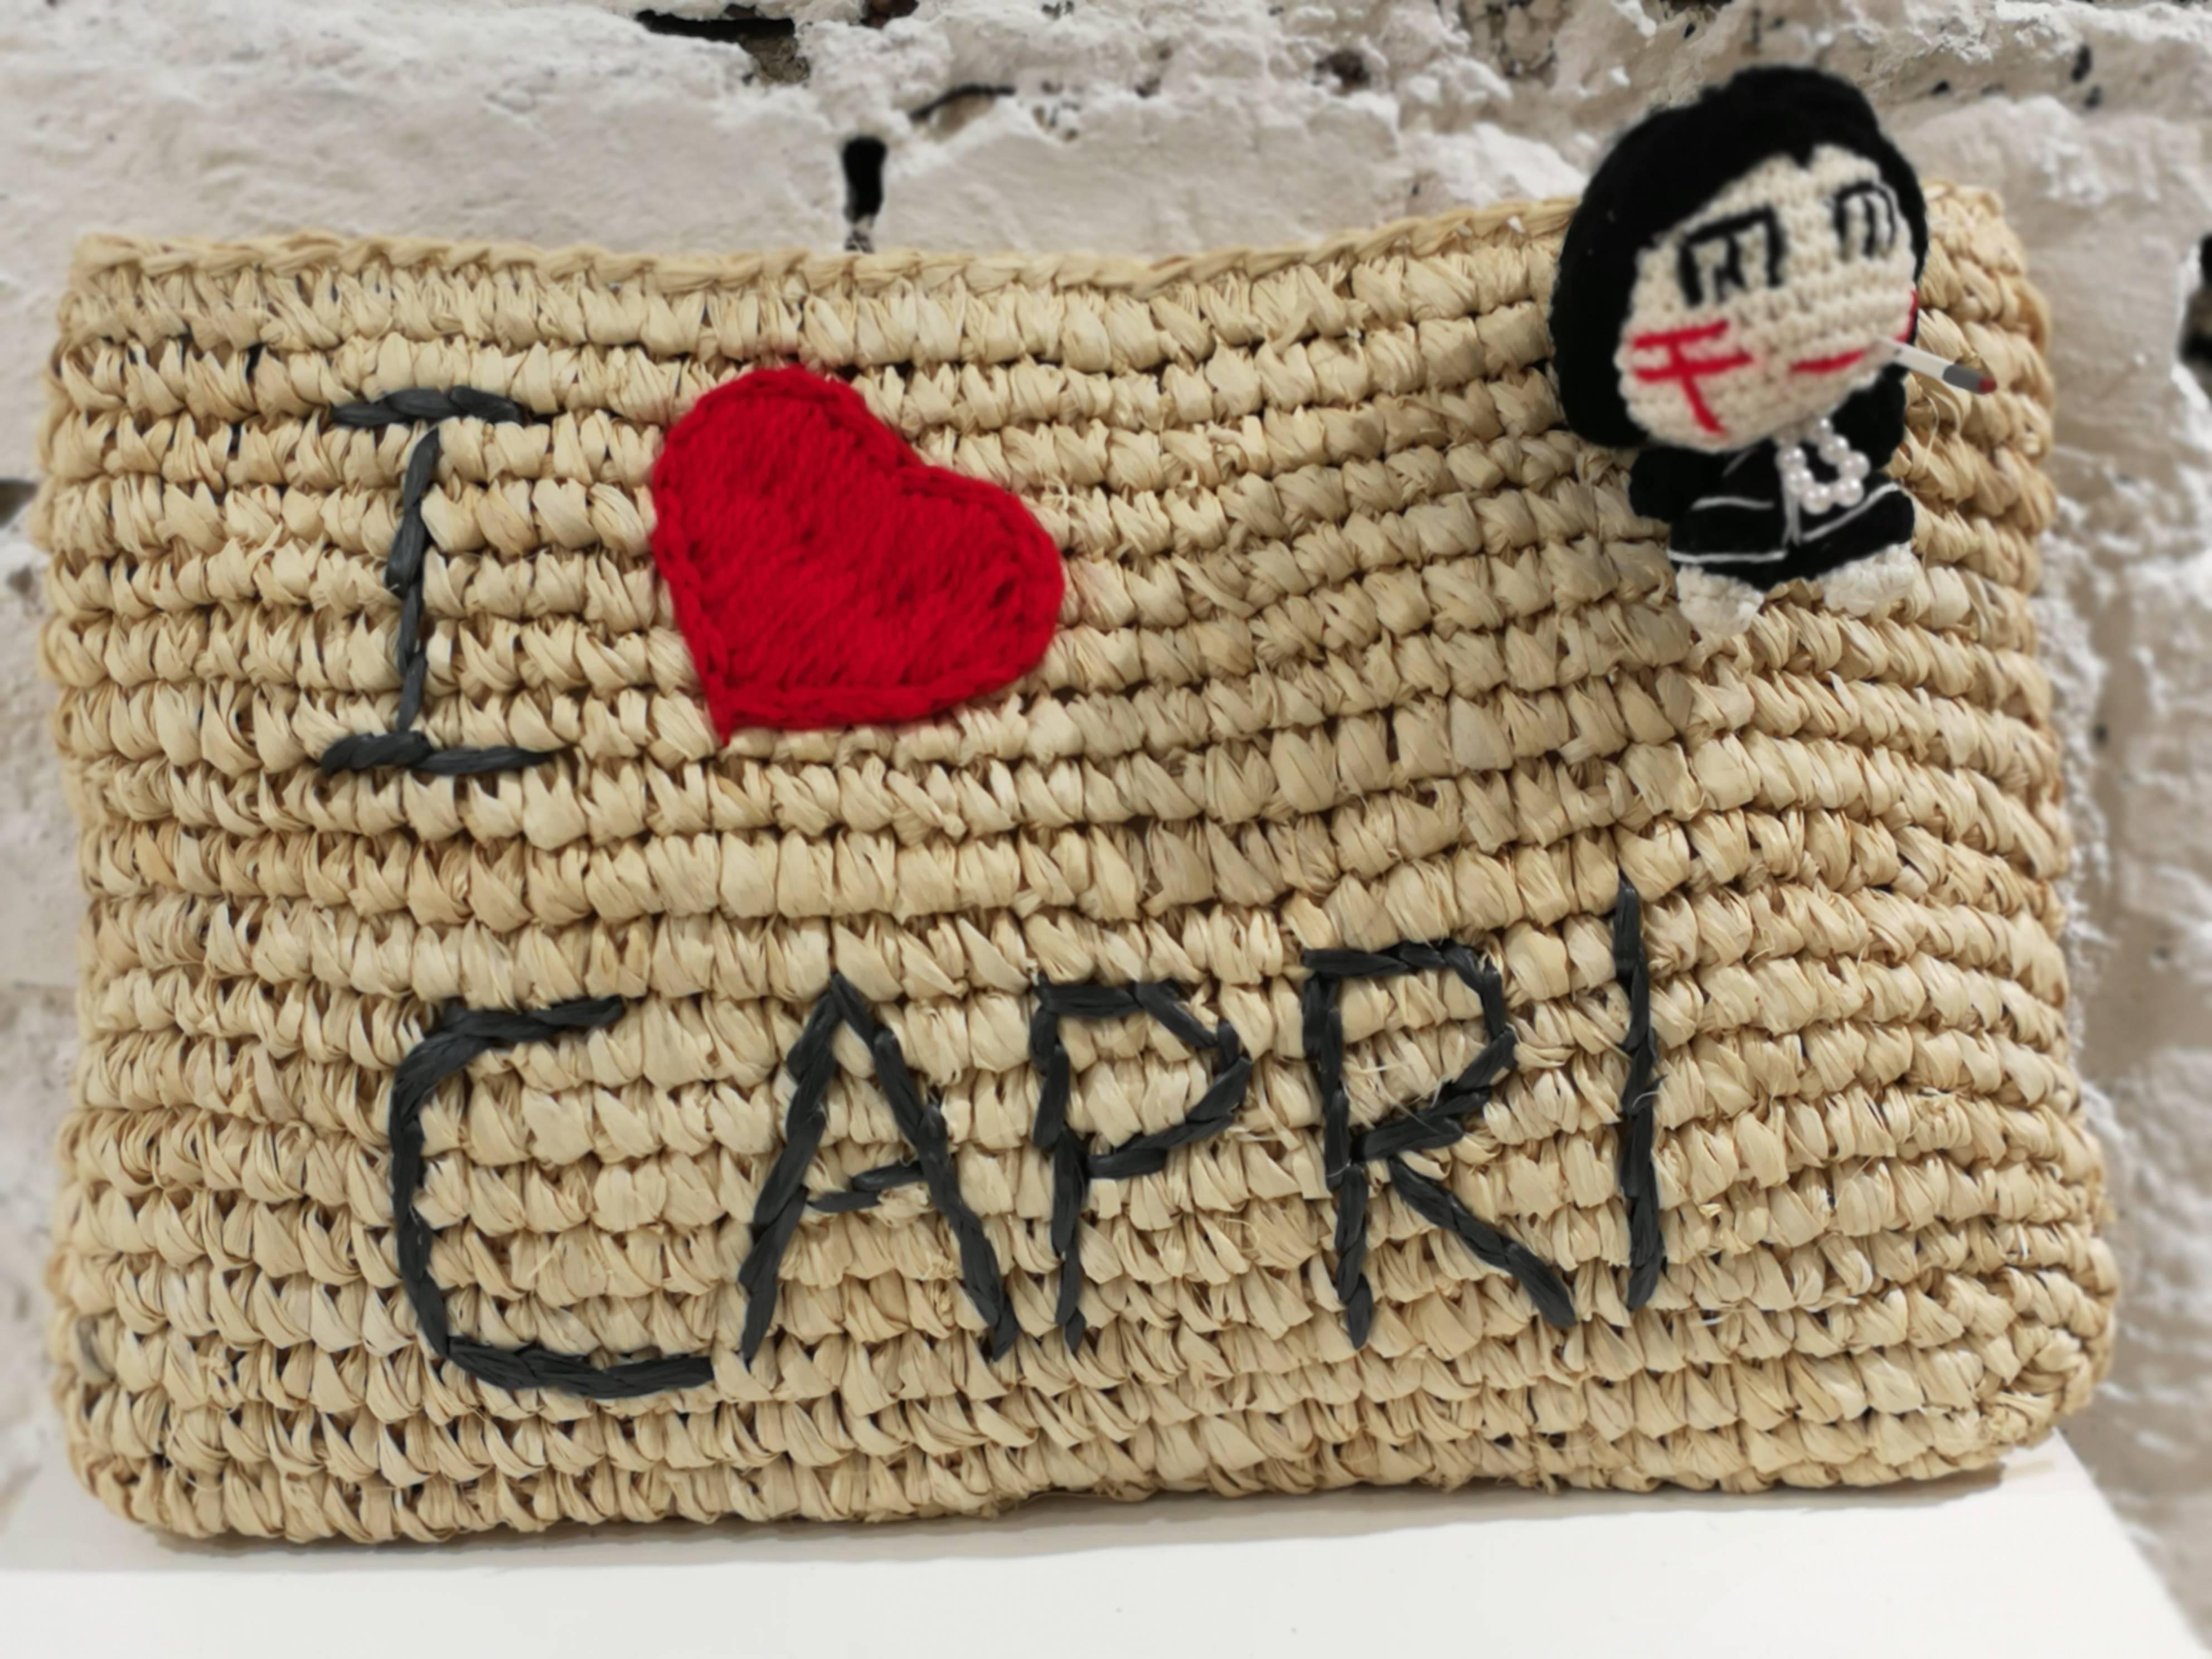 Mua Mua I Love Capri Raffia Nude Clutch Pochette

Capsule just for this store in Capri 

Embellished with Coco Doll Brooch that can be removed and replaced wherever you prefer

Measurements: 30 *18 cm